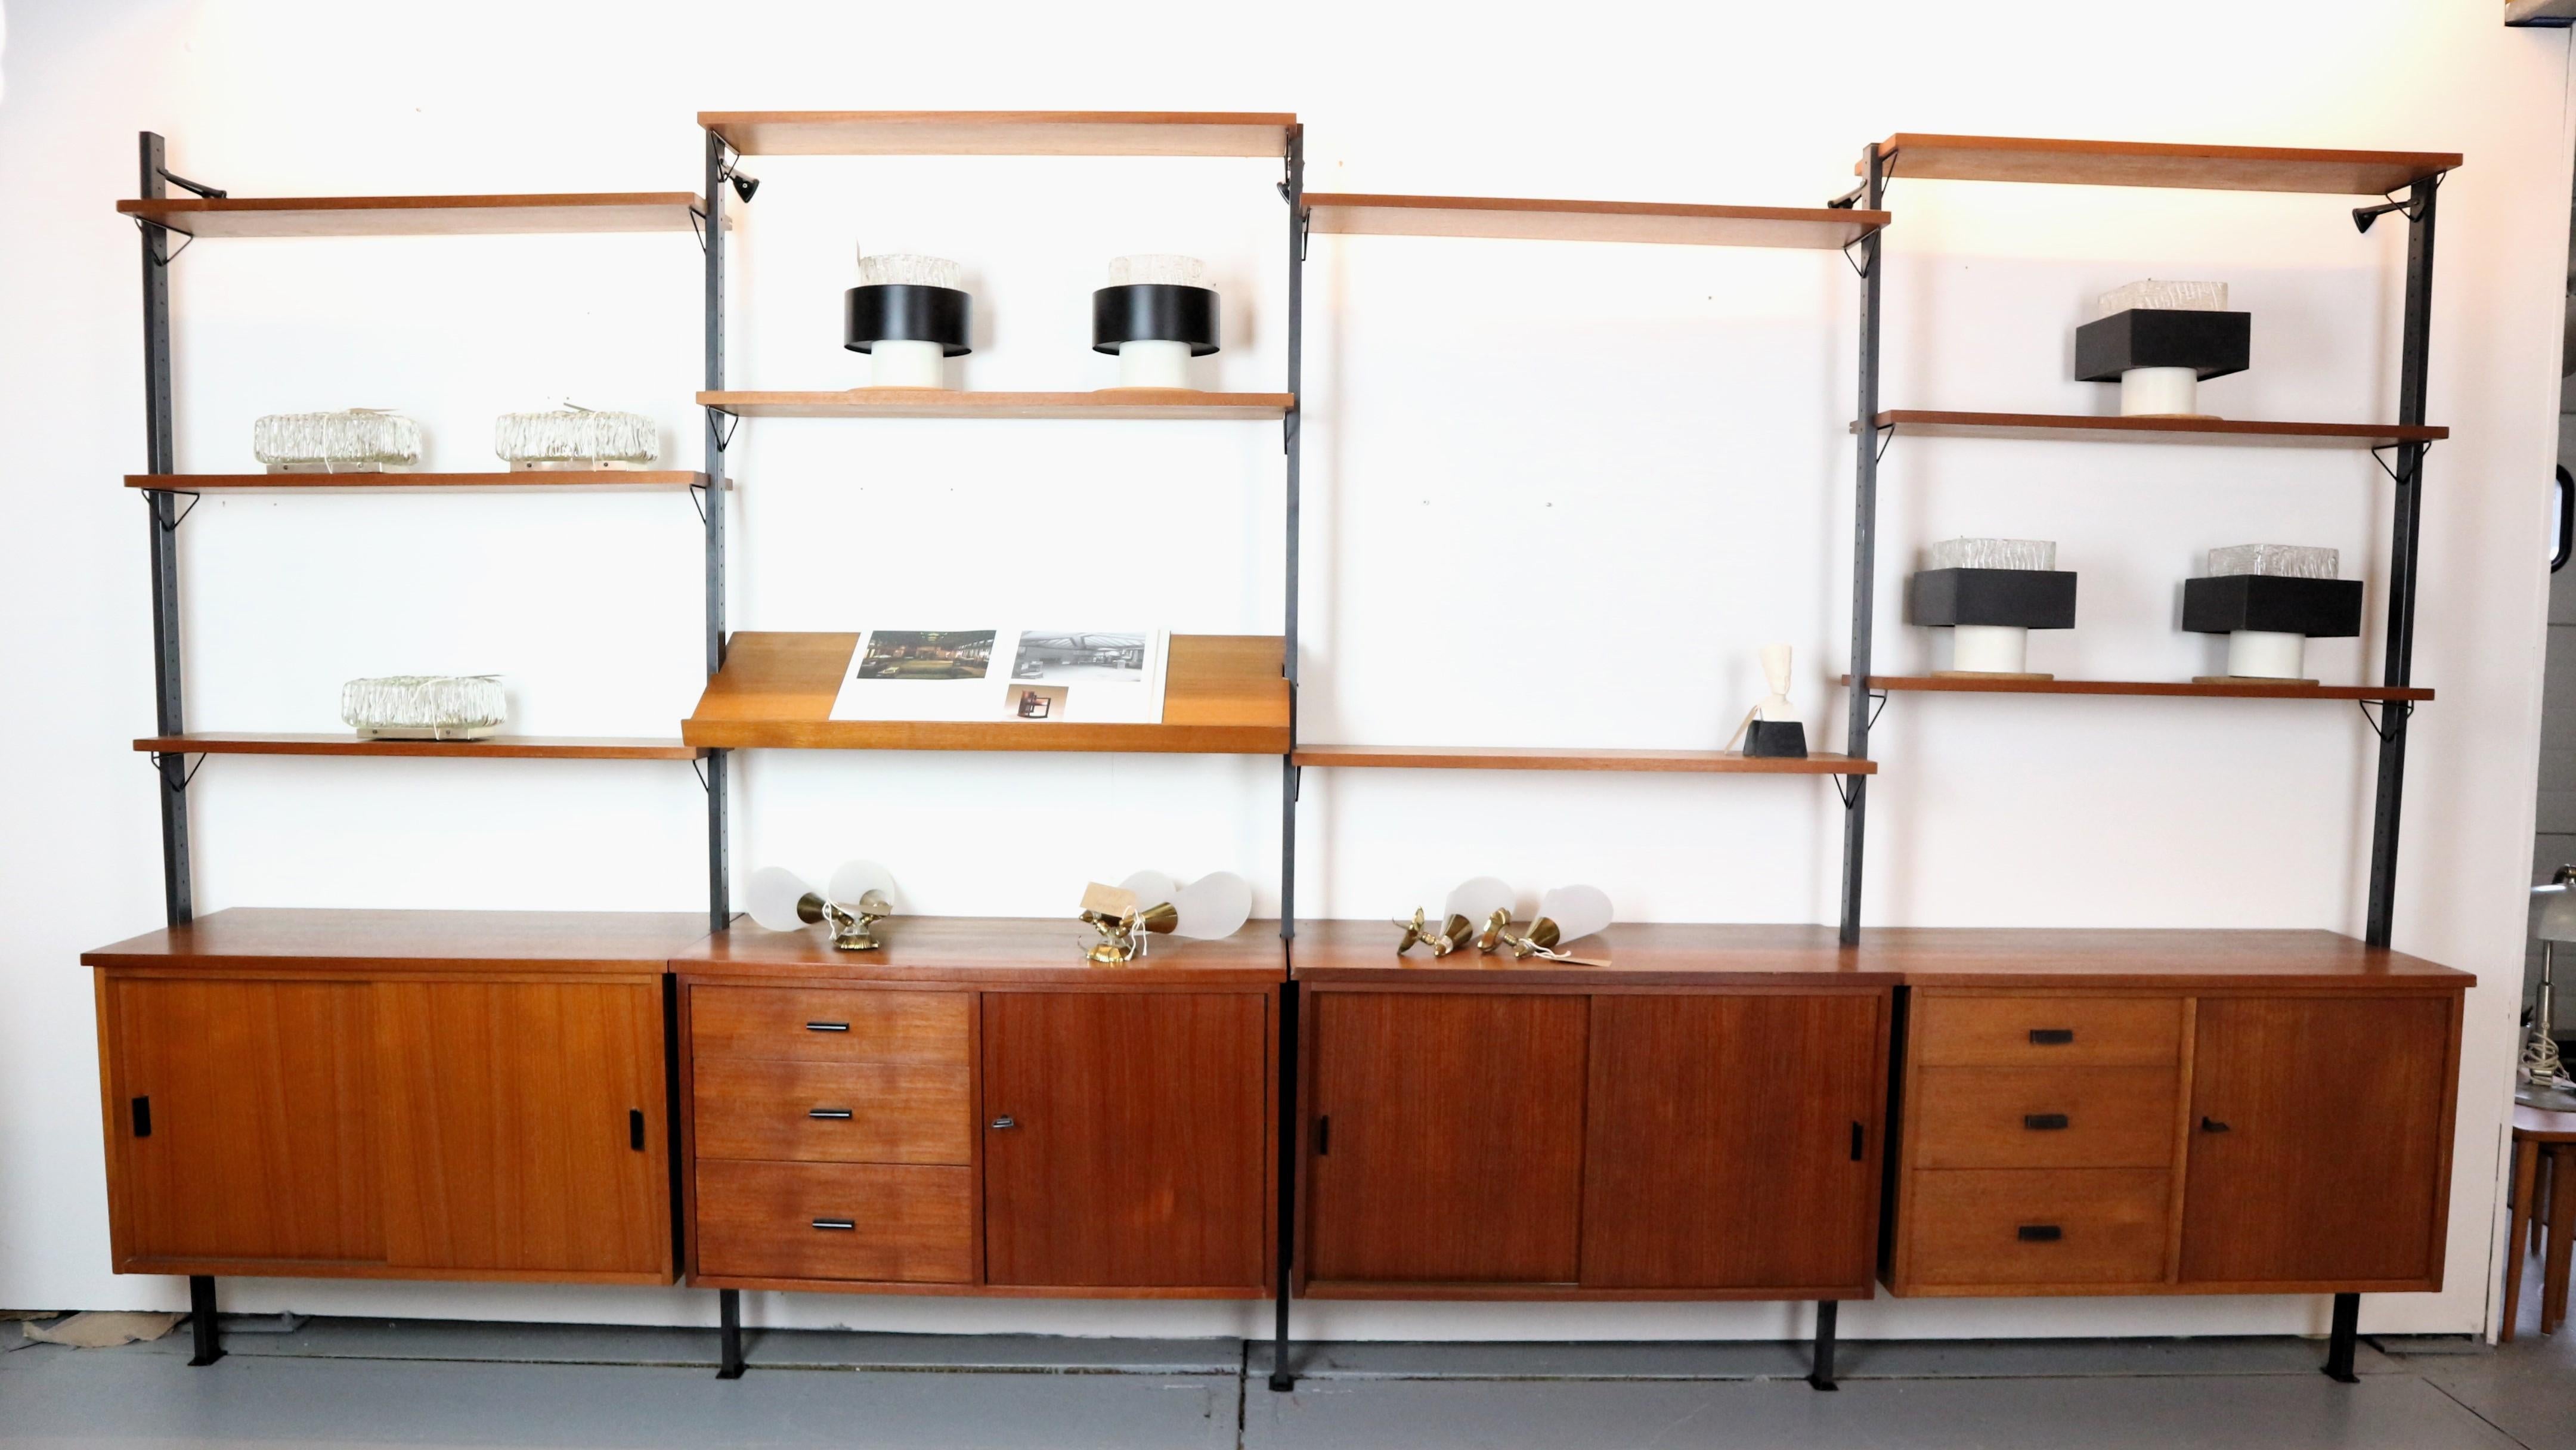 A large  1960s modular shelving system ‘Pira’ designed by Olaf Pira for string of Sweden, made of teak and steel.
The piece is a large modular wall system with five wall brackets, four storage cabinets and 11 shelfs. The individual elements of the